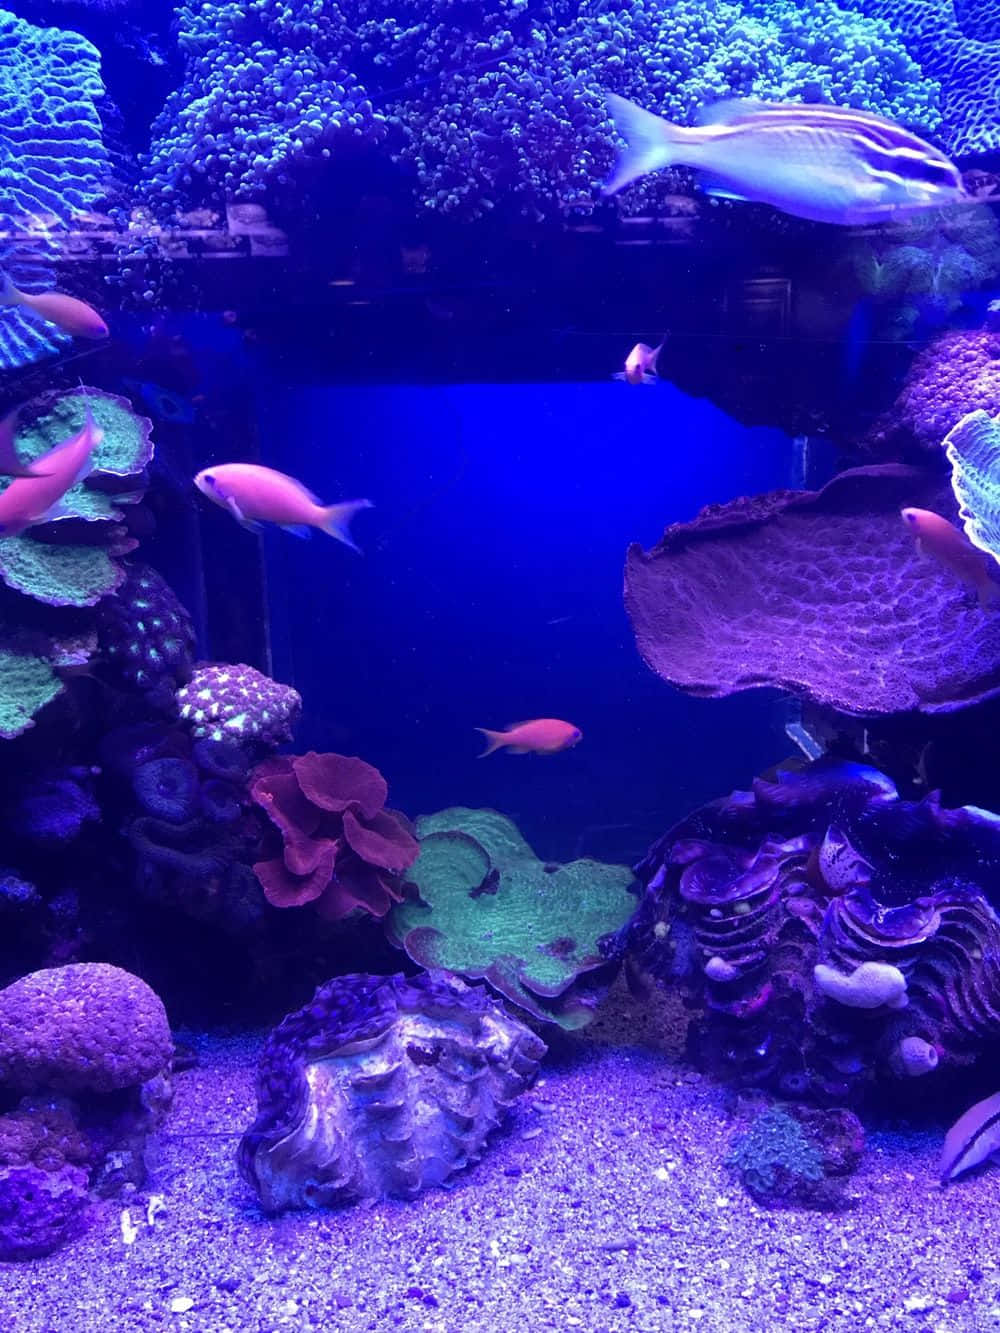 A Large Aquarium With Many Different Fish Wallpaper